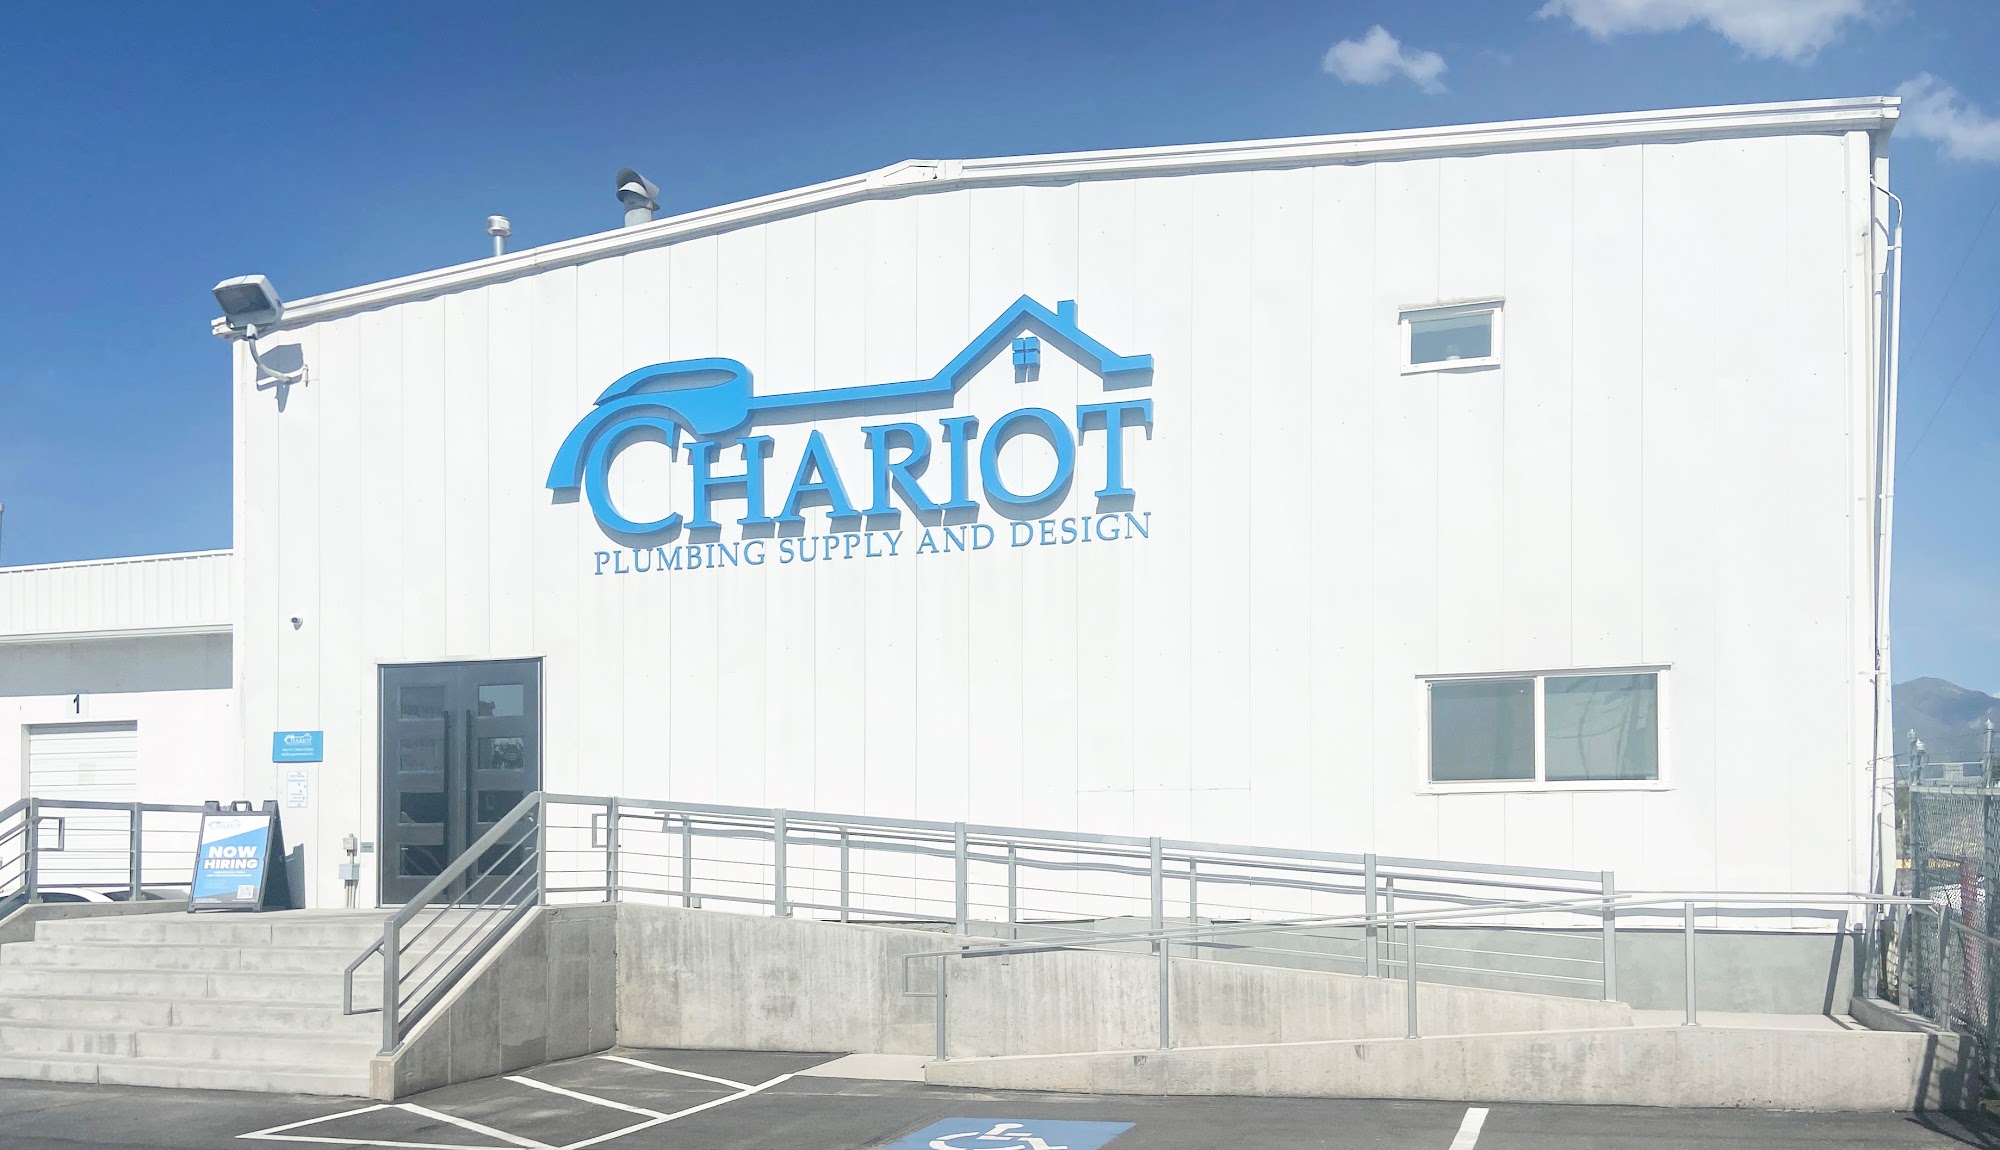 Chariot Plumbing Supply and Design